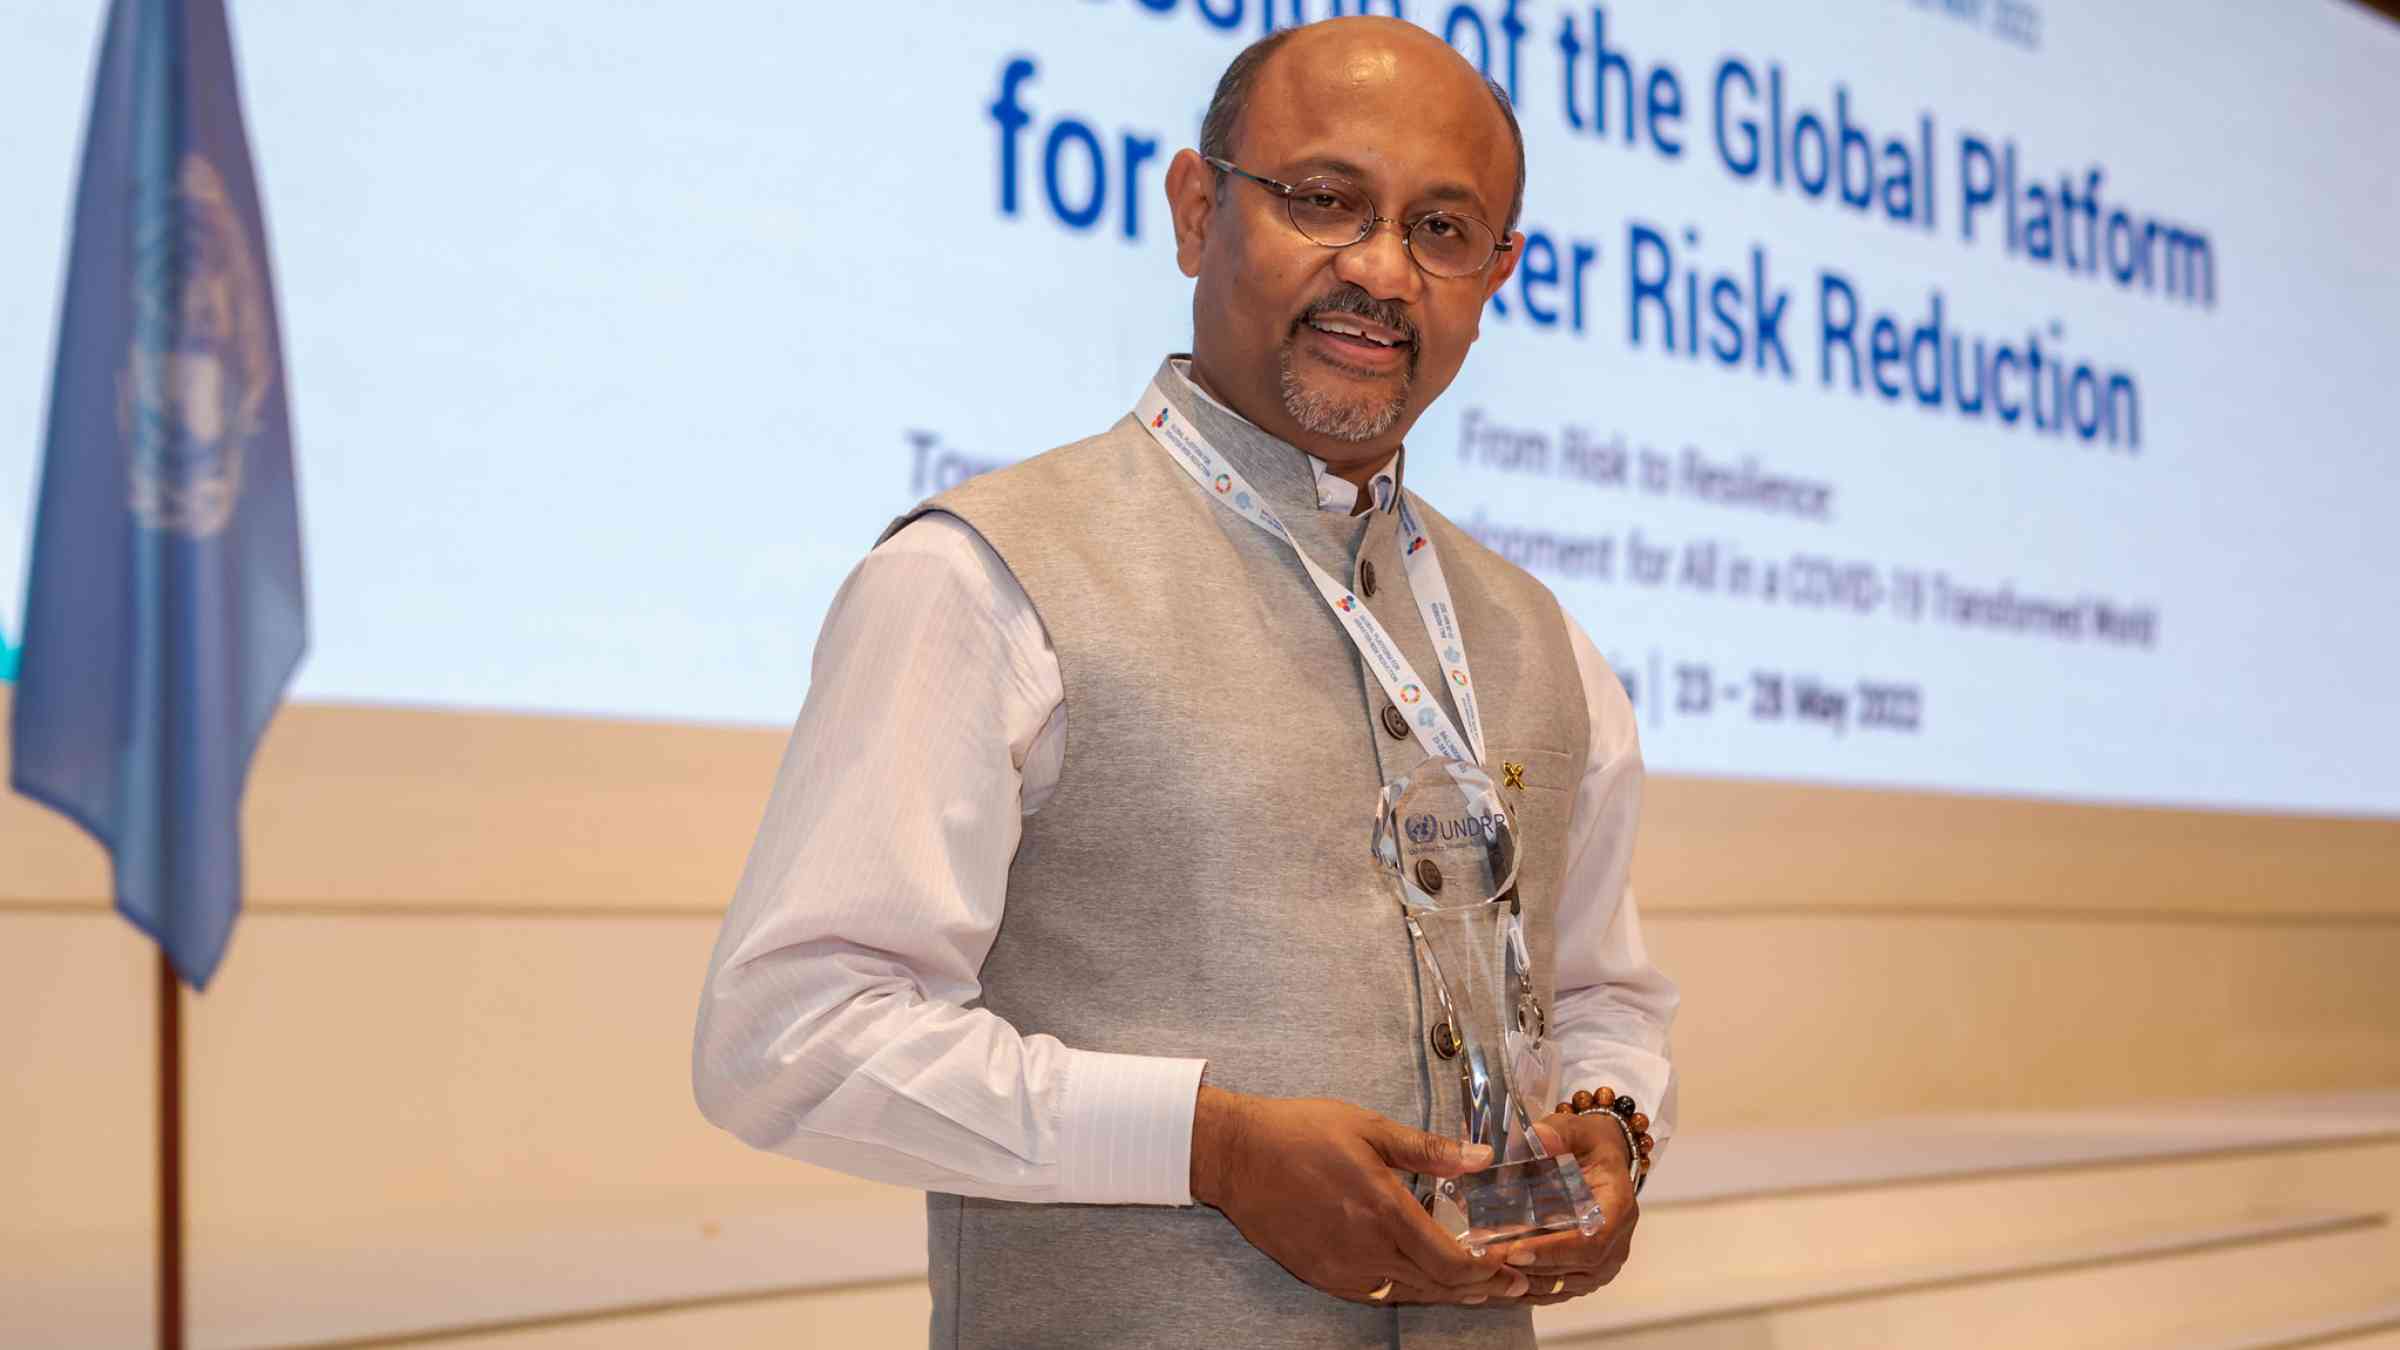 Rajib Shaw - Professor at Graduate School of Media and Governance, Keio University, Japan - has championed multi-hazard community-based disaster risk reduction in six Asian countries, and his work has led to the establishment of village level community-based working groups.